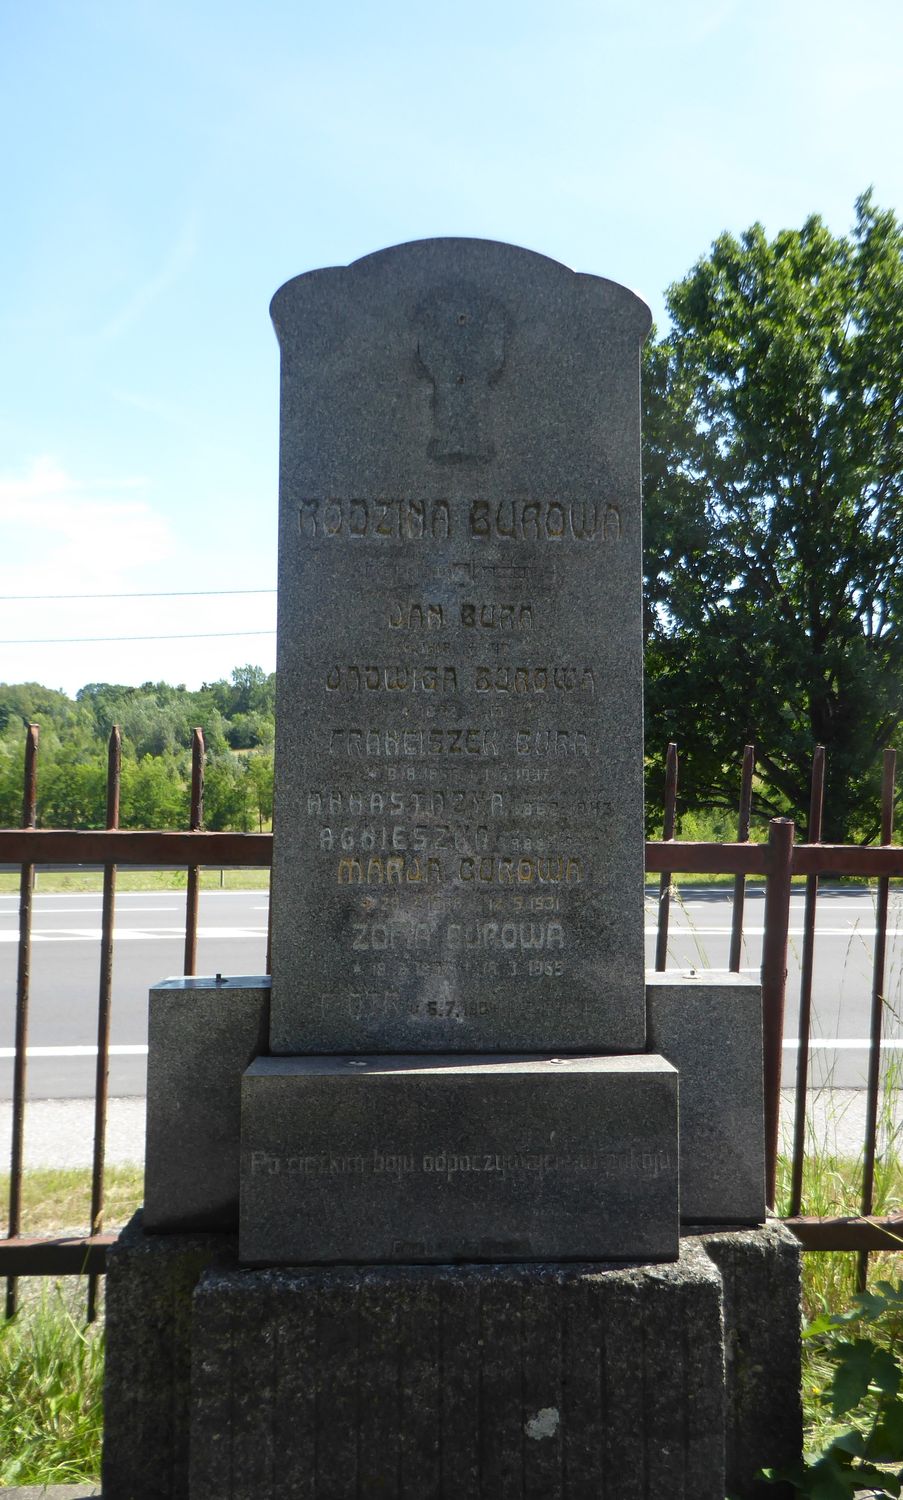 Fragment of a tombstone of the Burová family from the cemetery of the Czech part of Těšín Silesia, as of 2022.